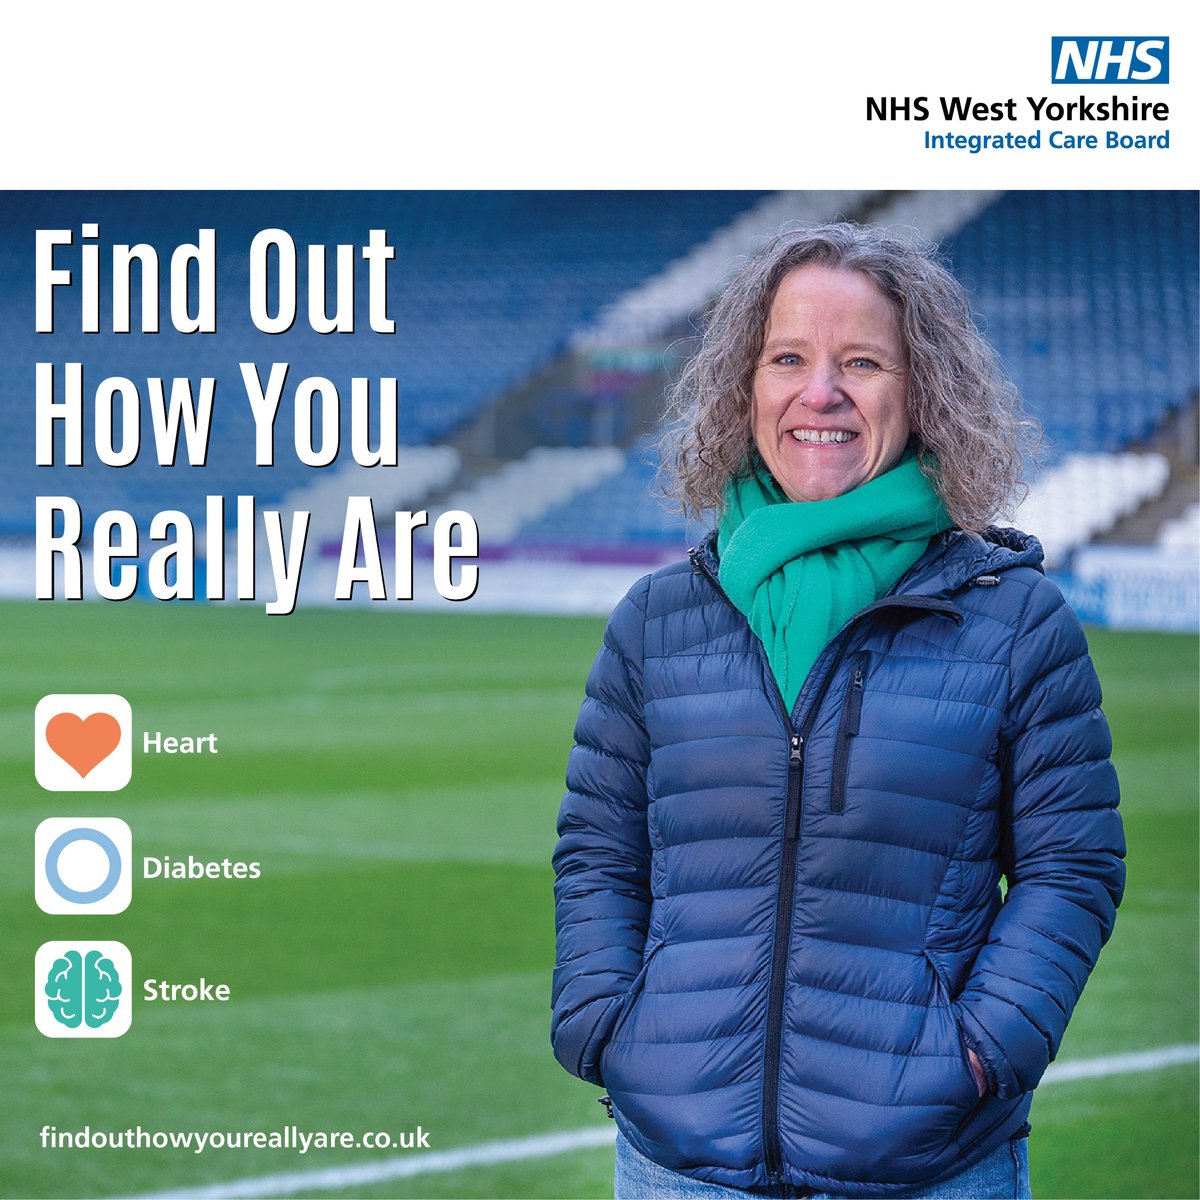 Find Out How You Really Are is a #WestYorkshire initiative, and we’re thrilled to team up with local rugby league clubs to help fans, followers and residents to #StayHealthy 💗🔵🧠 findouthowyoureallyare.co.uk @ctrlfc